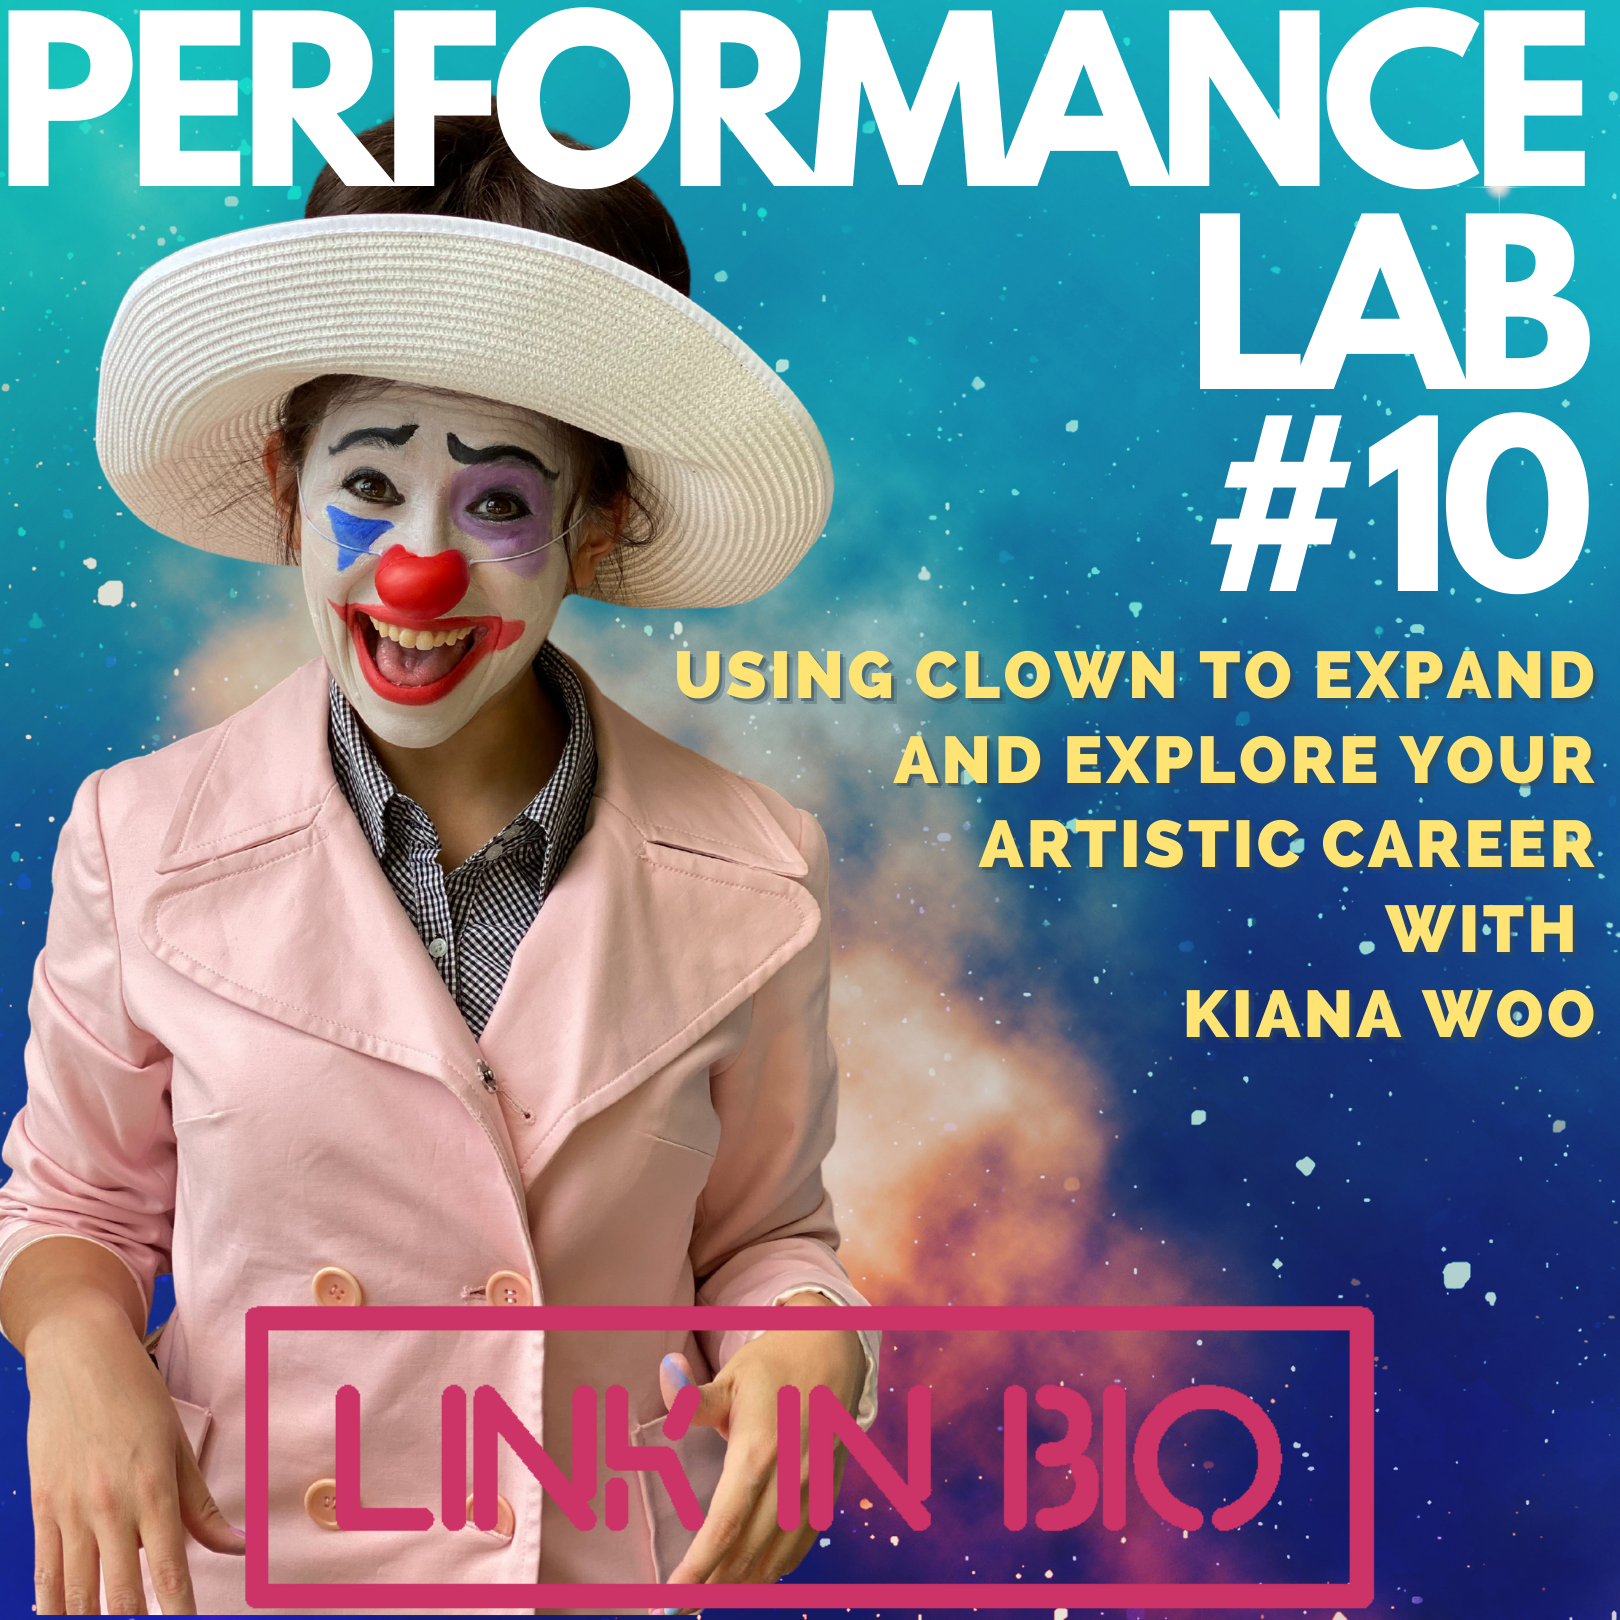 Kiana Woo, with white clown makeup, a blue downward-pointing triangle on her left cheek, purple around her right eye and bright red clown nose and lipstick that extends past her beaming smile, with the text PERFORMANCE LAB #10. Using Clown to Expand and Explore your Artistic Career with Kiana Woo, Link in Bio. Kiana and text are layered on a background of a bright blue, indigo and orange galaxy. 